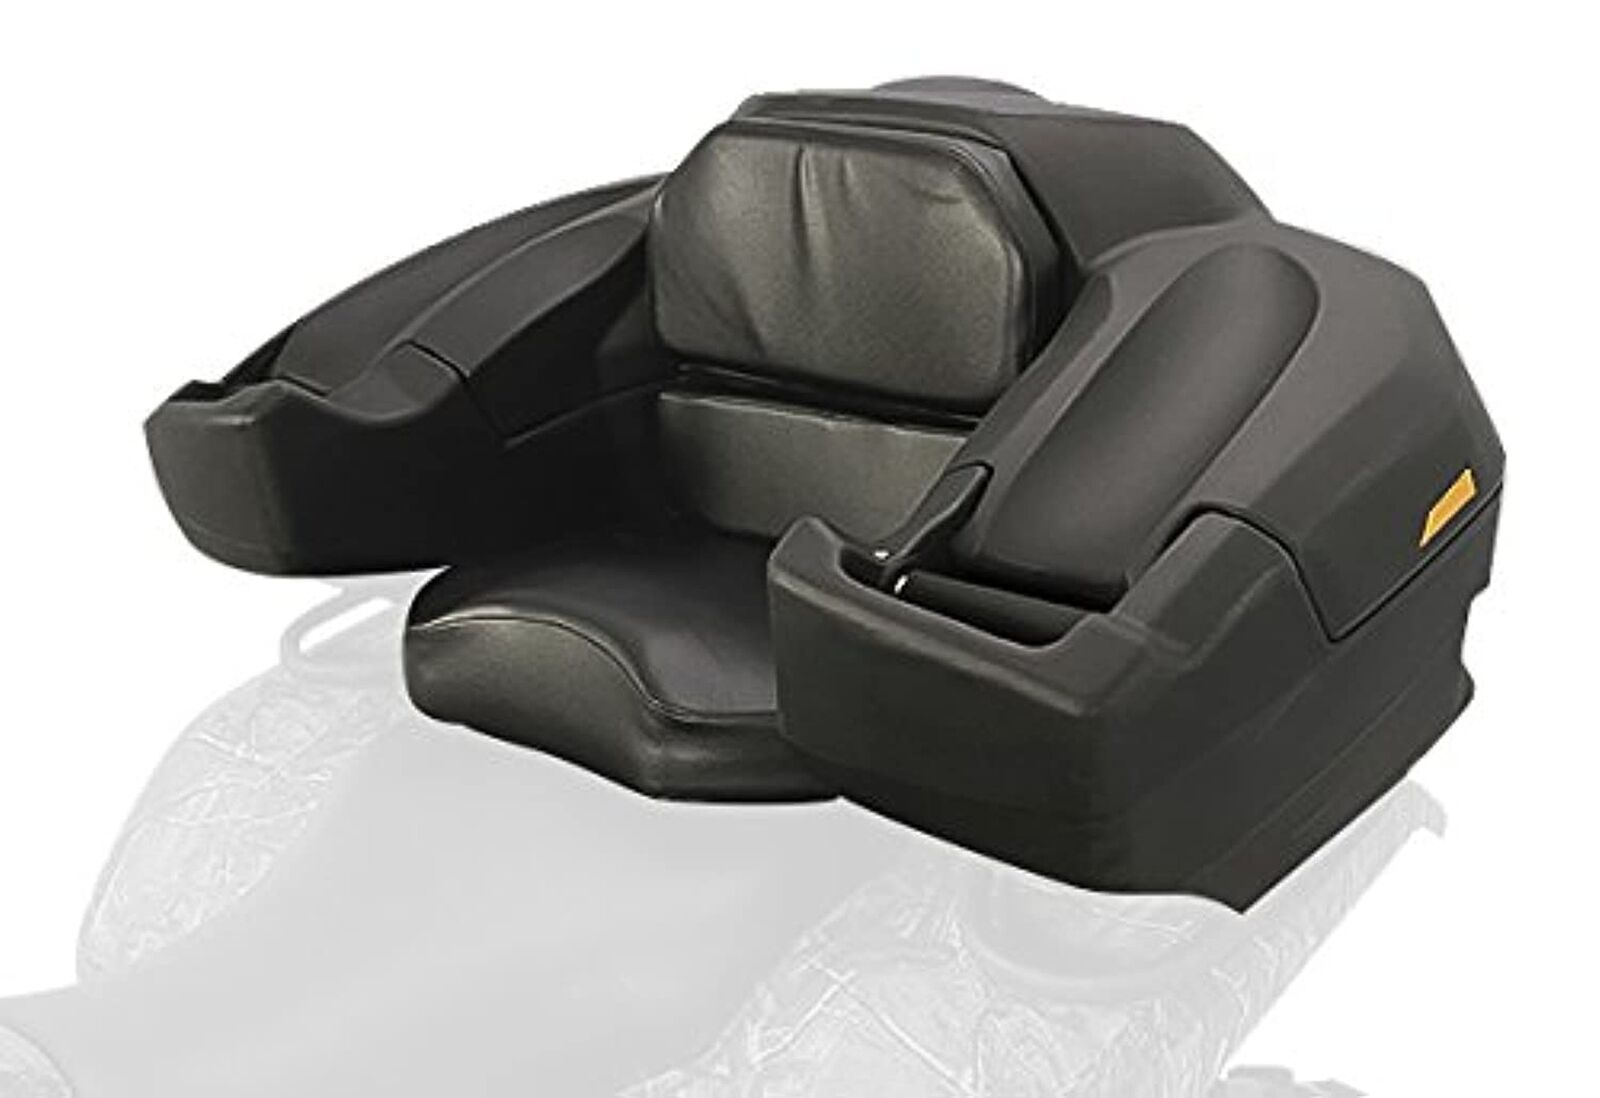 Camco Black Boar ATV Rear Storage Box and Lounger (66010) Accessories